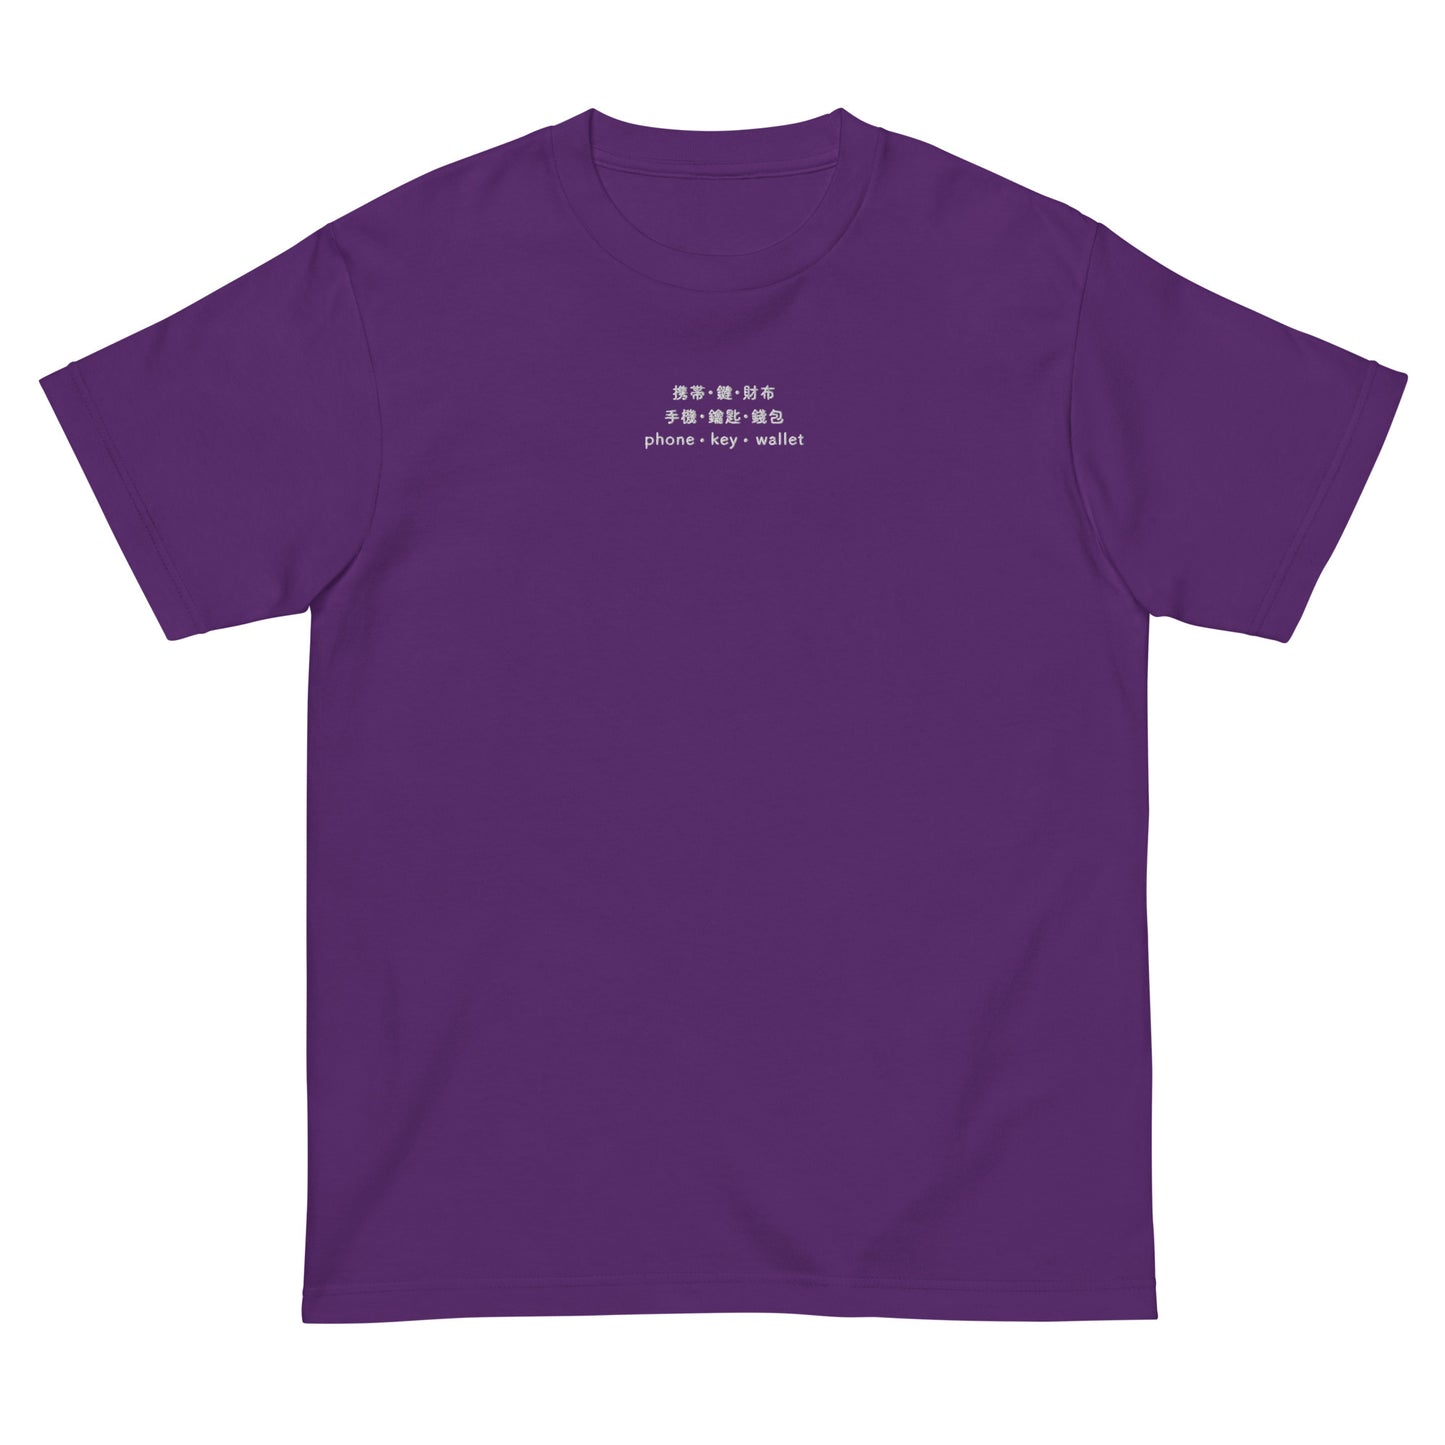 Purple High Quality Tee - Front Design with an White Embroidery "Phone/Key/Wallet" in Japanese,Chinese and English